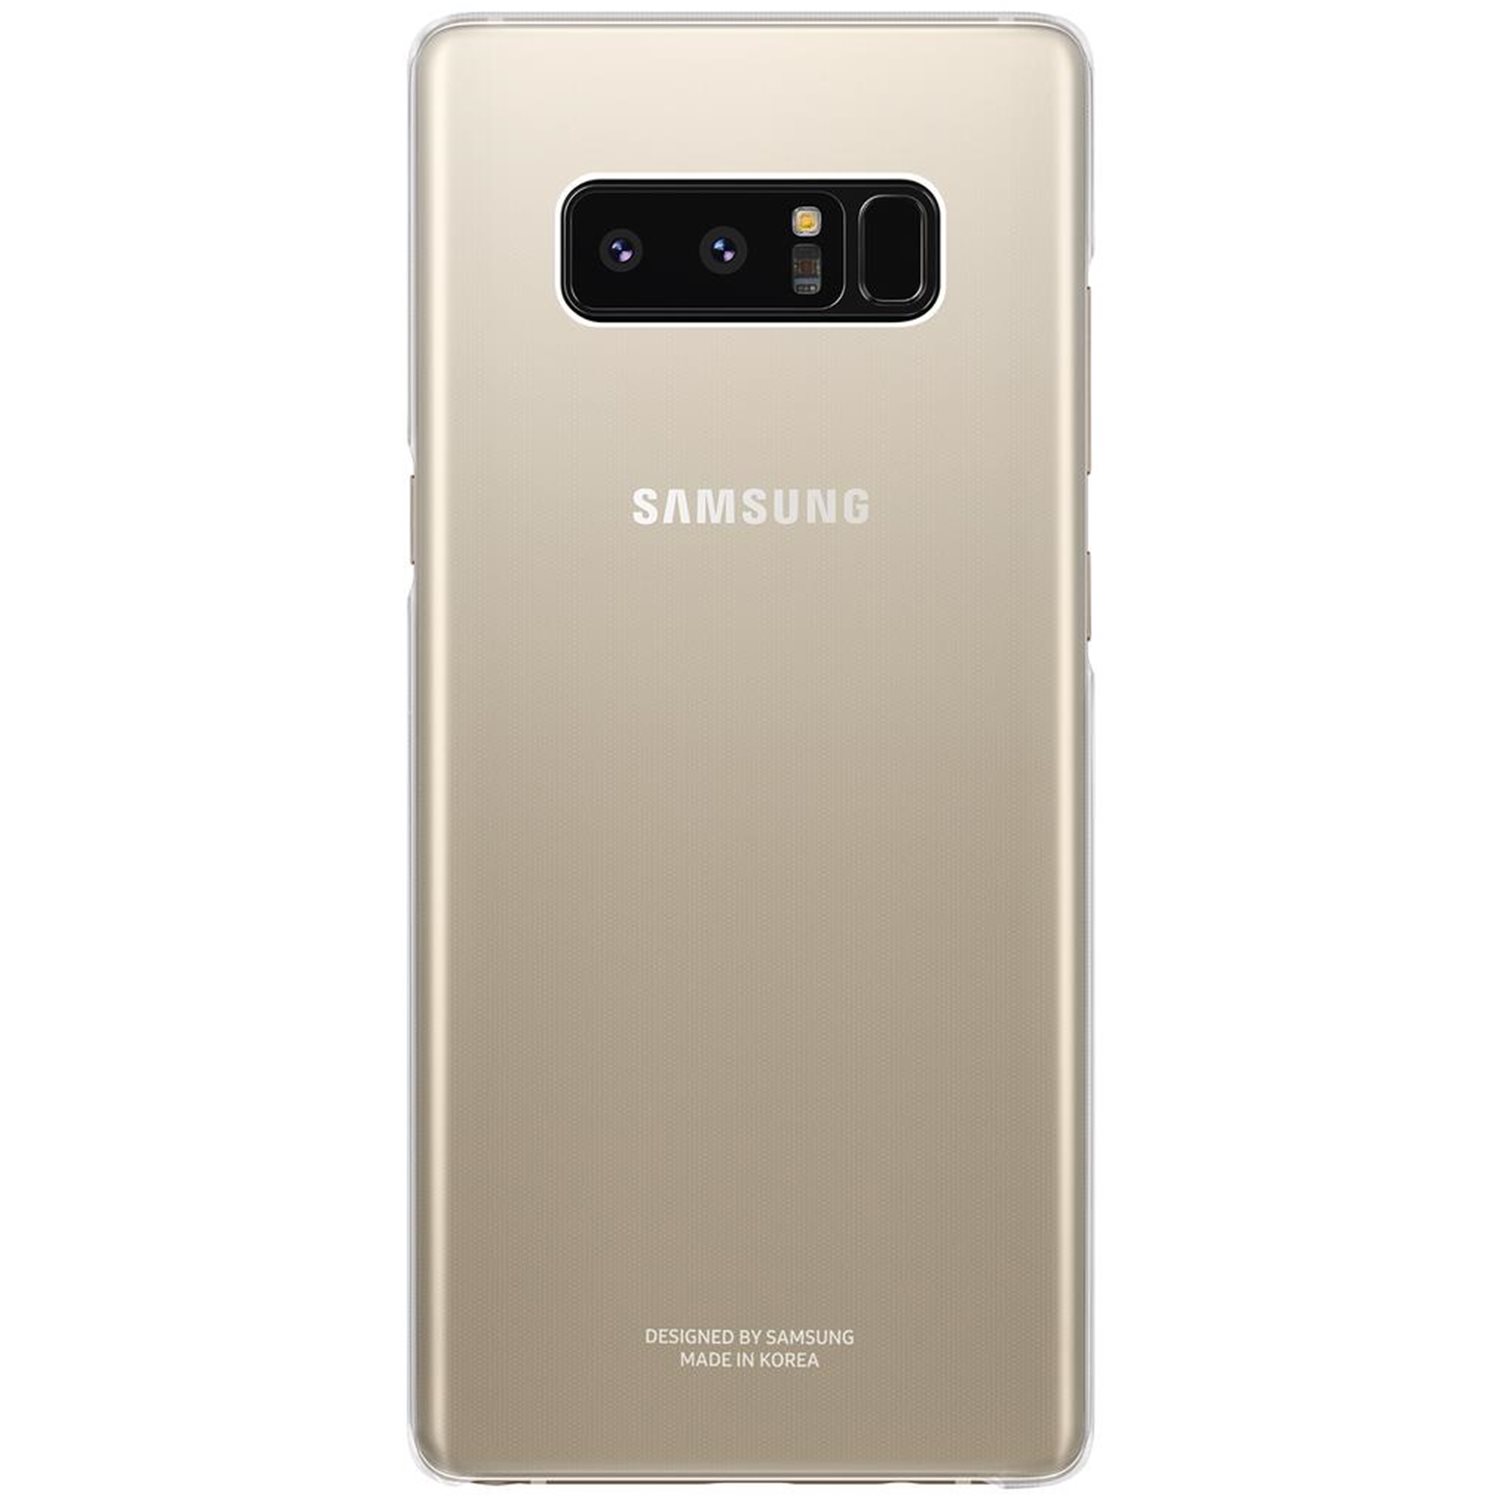 Official Samsung Galaxy Note 8 Clear Cover Case - Clear